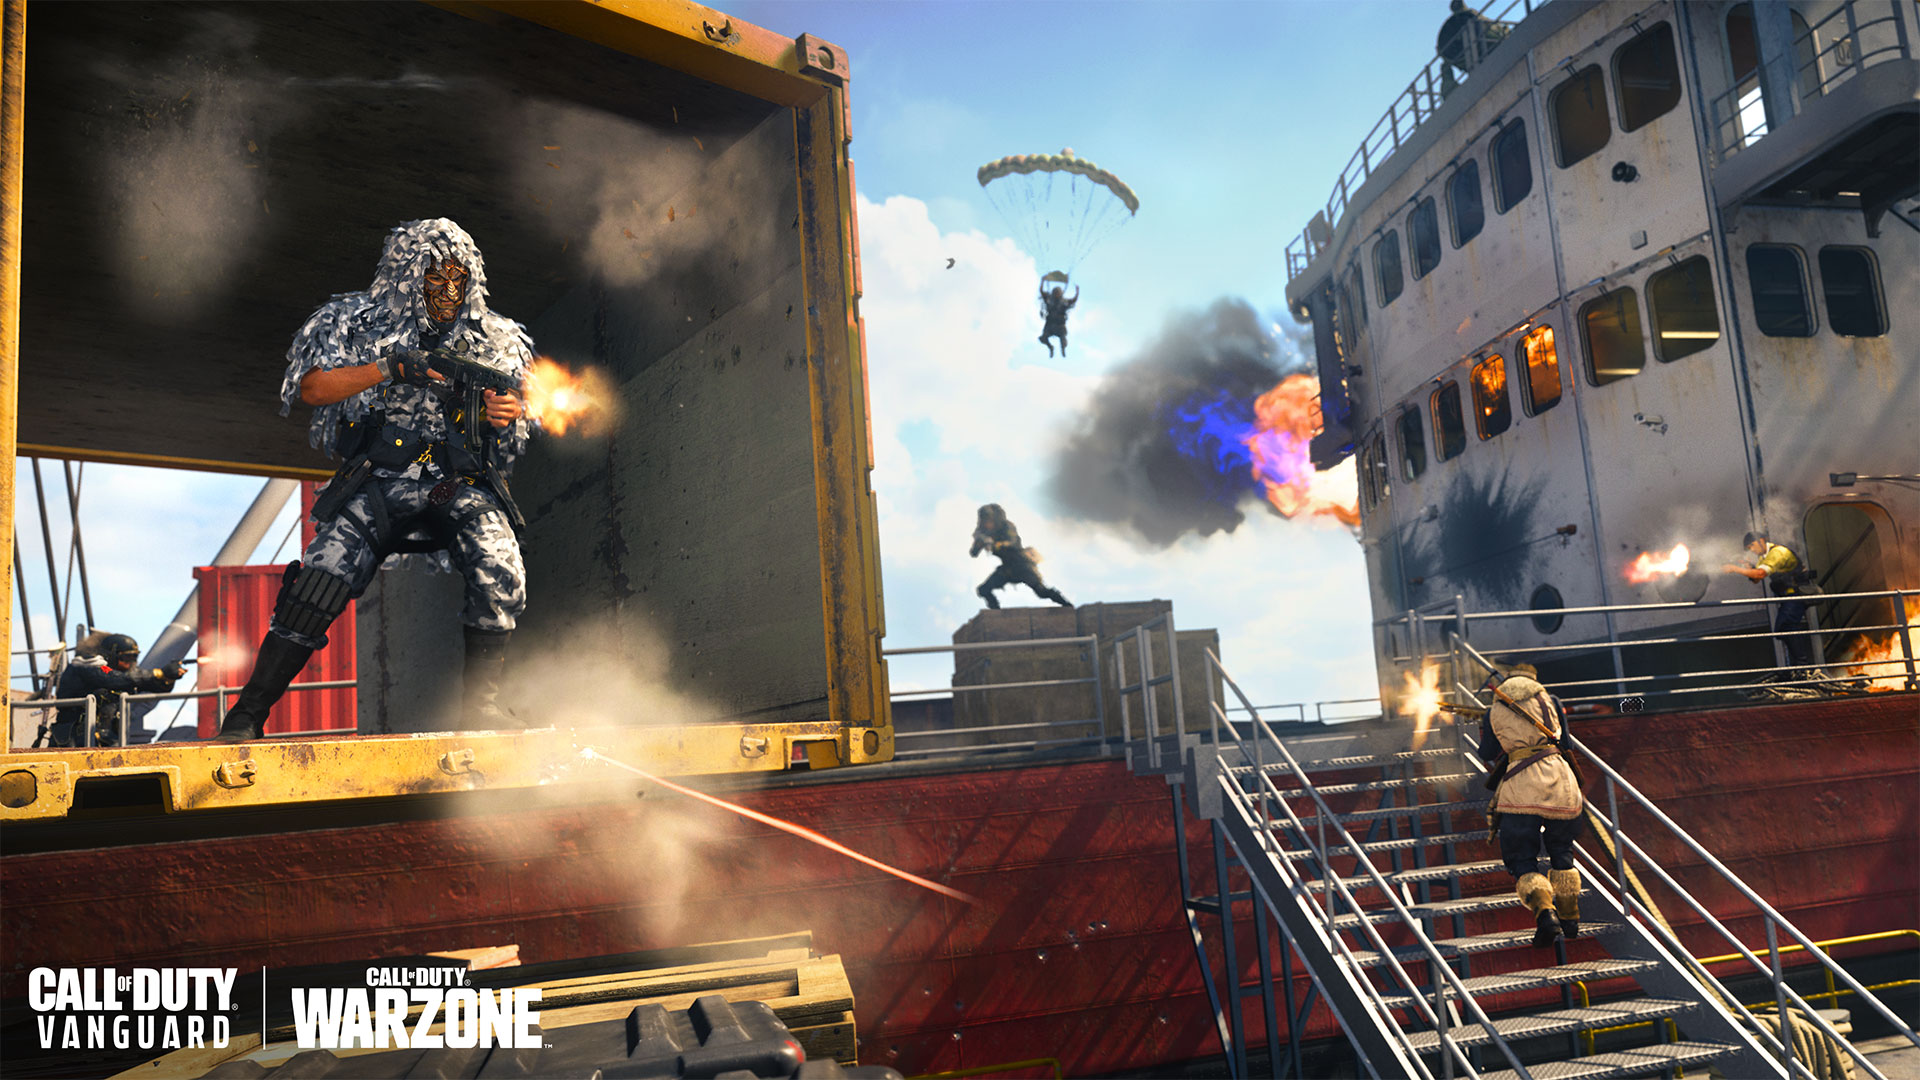 Does COD Warzone have any cross-play? We've got you covered on that, folks.